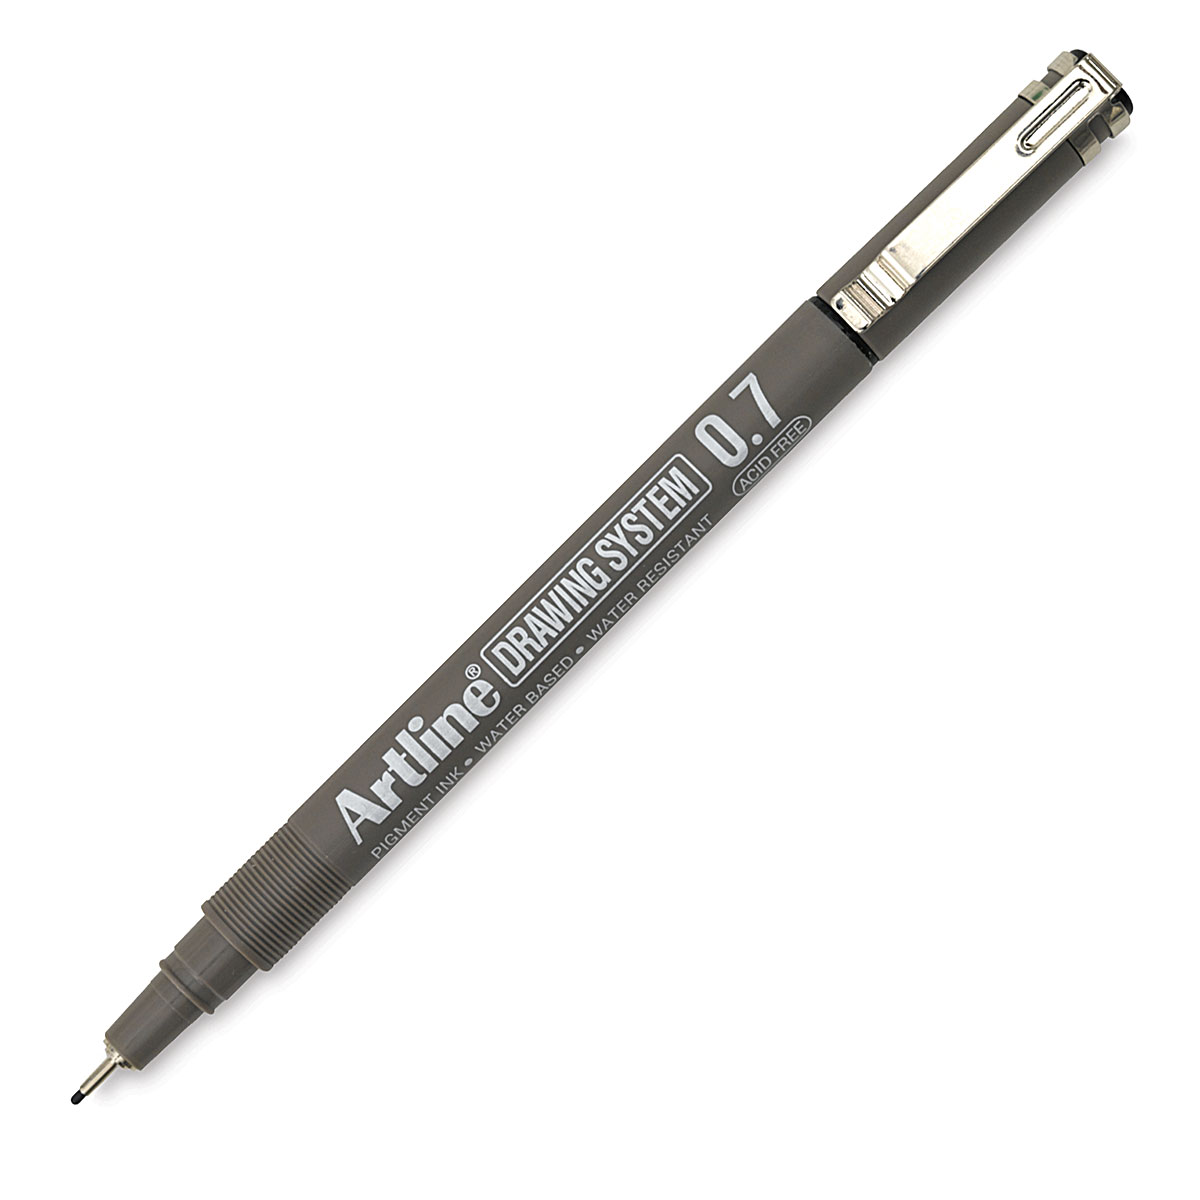 Artline Drawing System drawing pen review – Ian Hedley